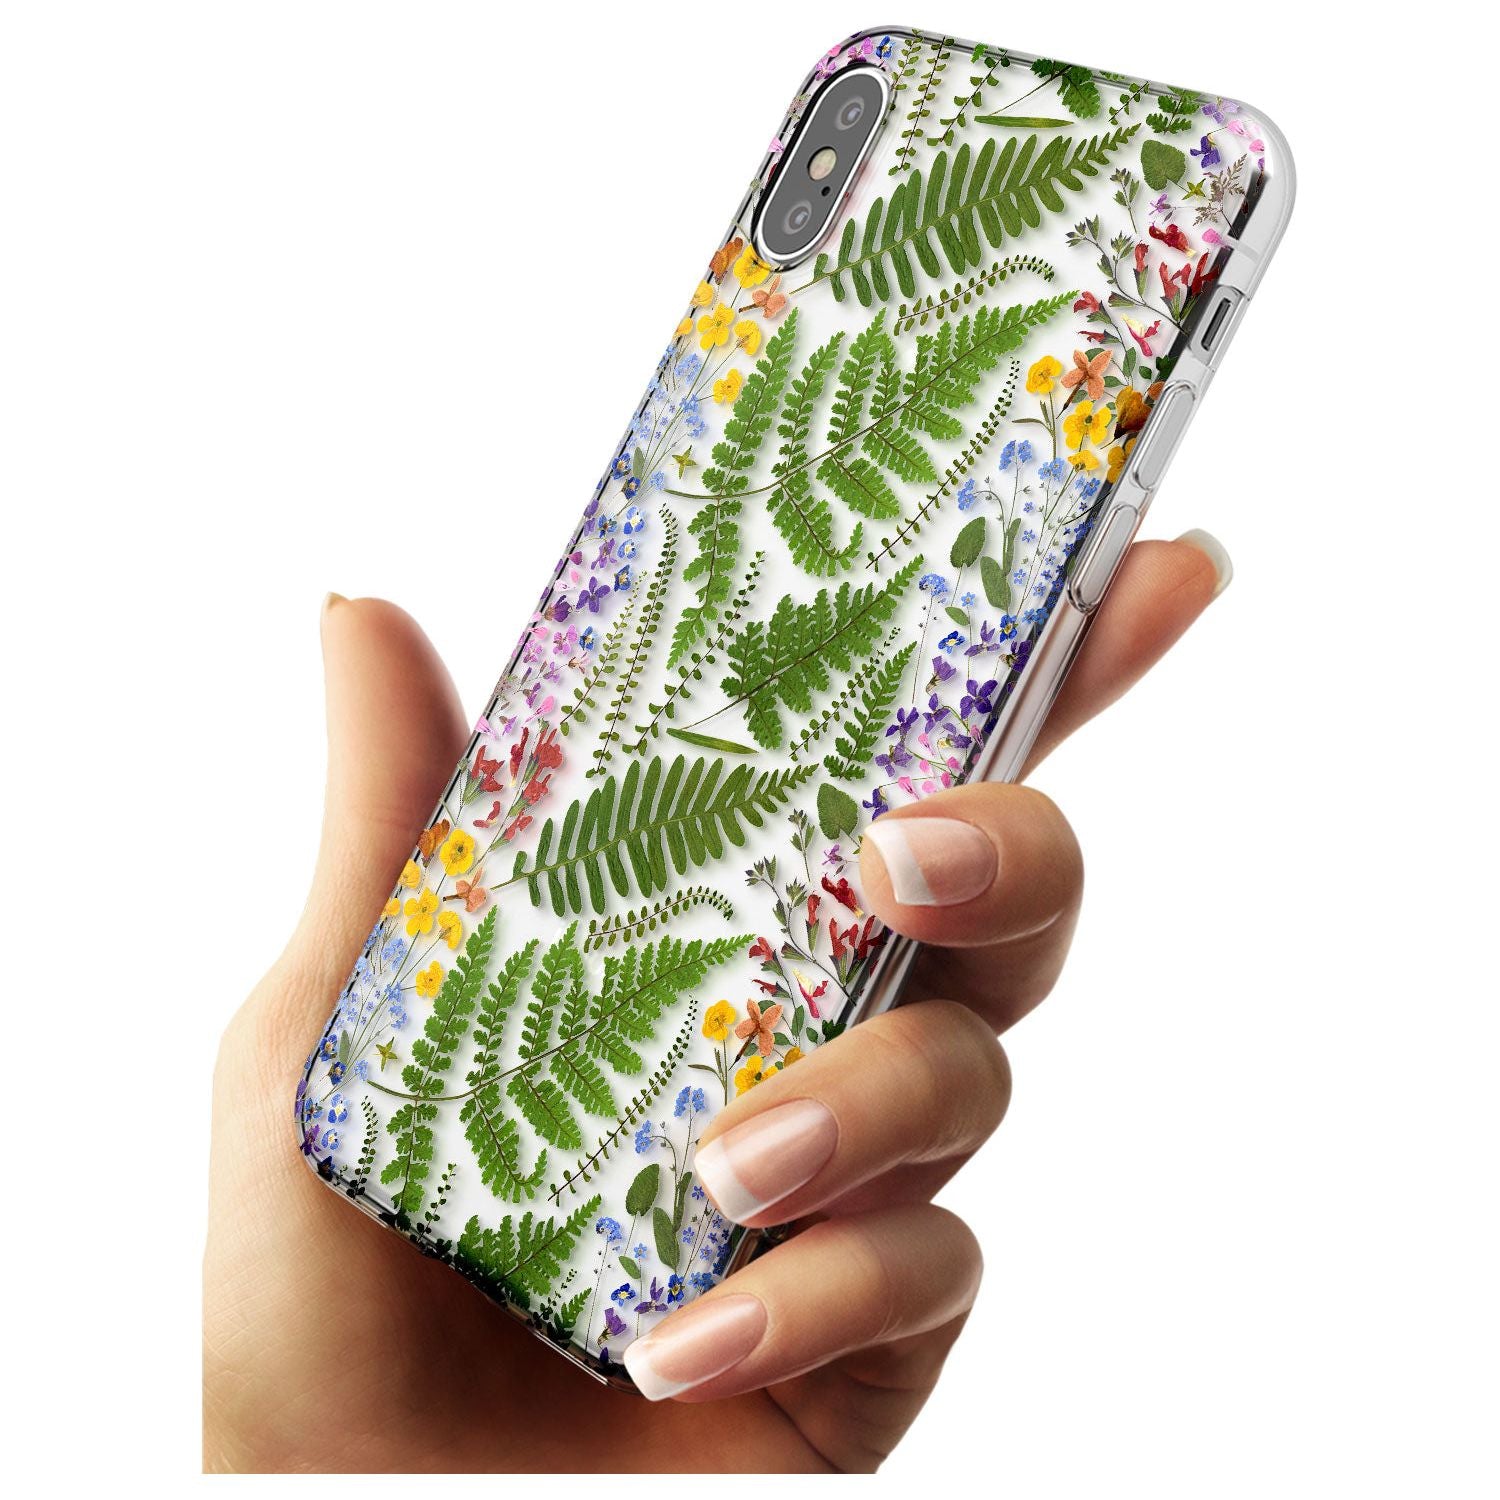 Busy Floral and Fern Design Slim TPU Phone Case Warehouse X XS Max XR